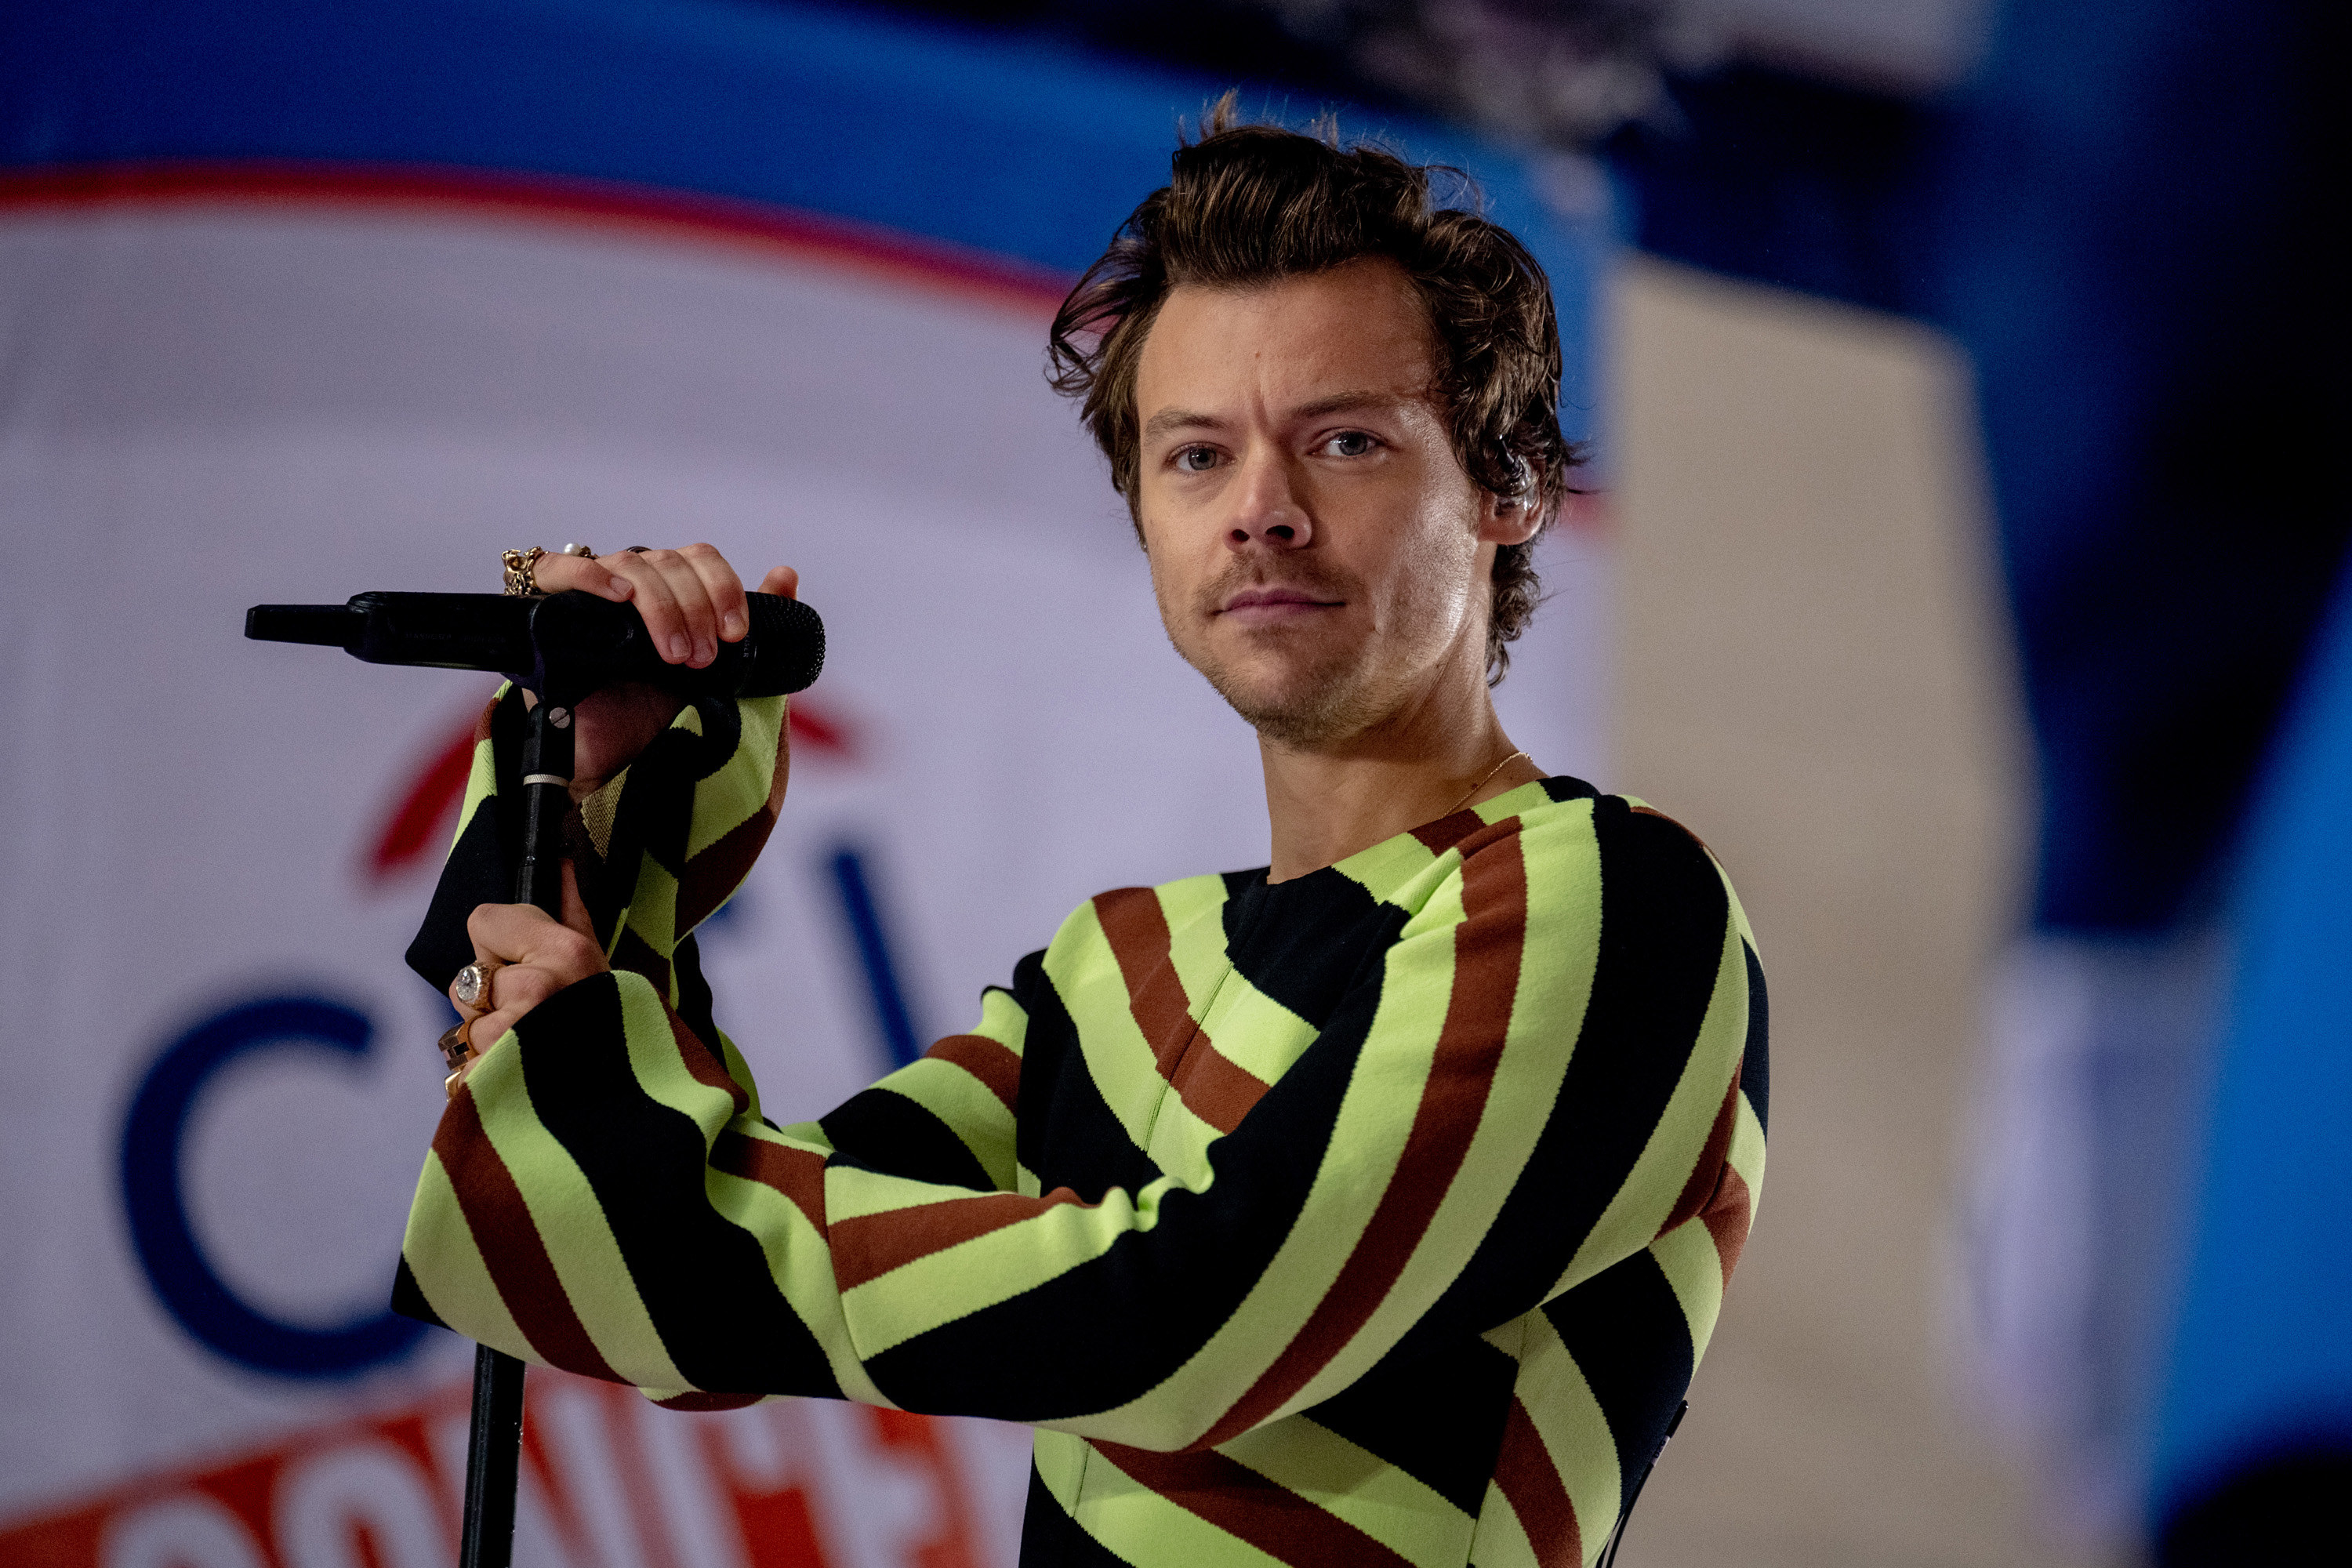 Harry Styles onstage